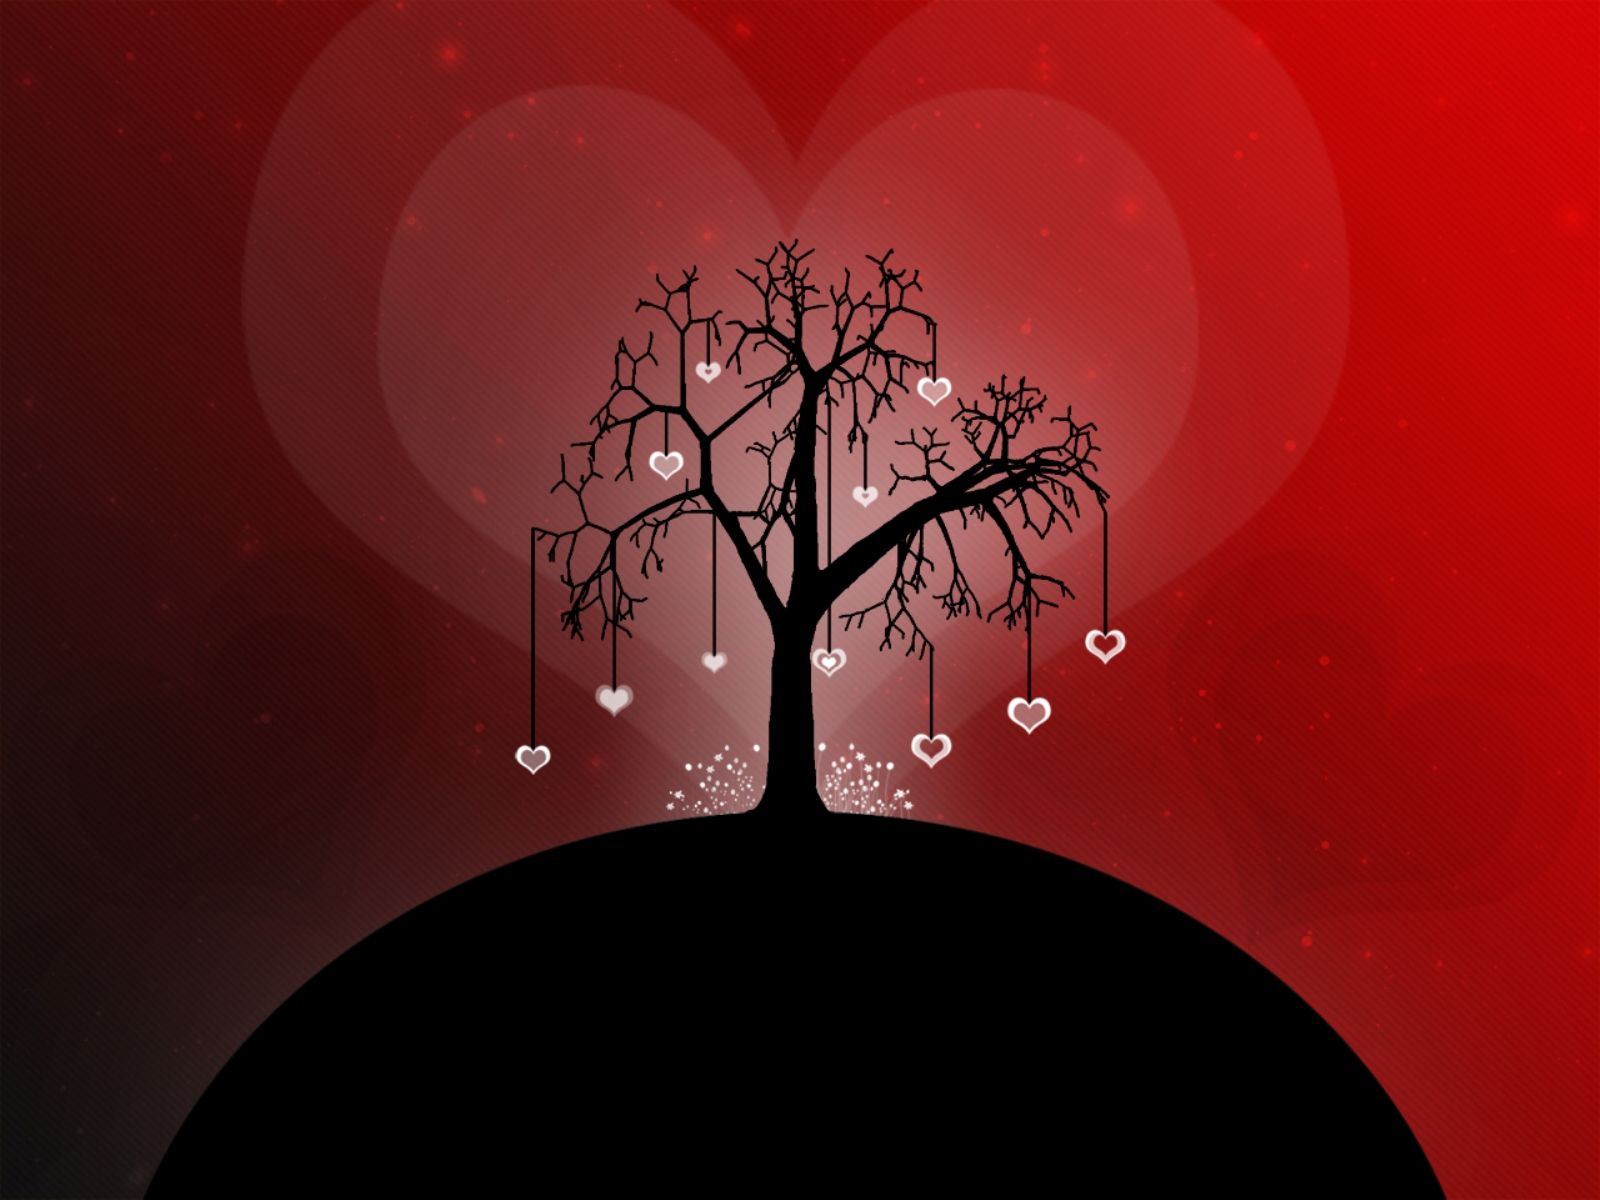 691 Love HD Wallpapers | Backgrounds - Wallpaper Abyss